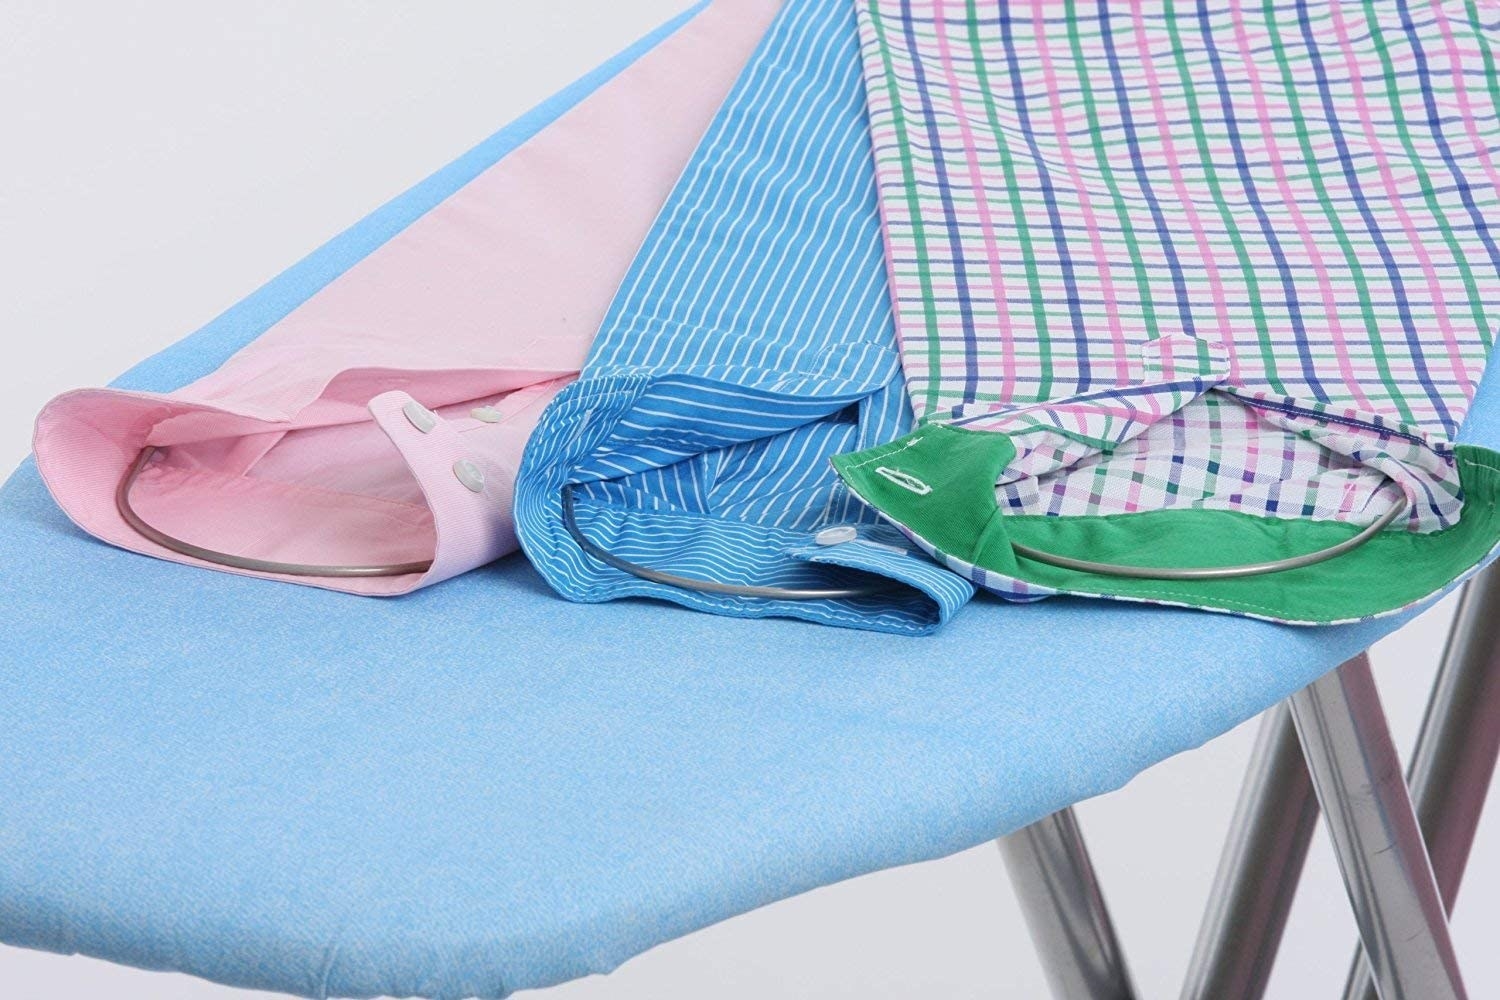 Three dress shirt arms on an ironing board with ironing assistants inside of them